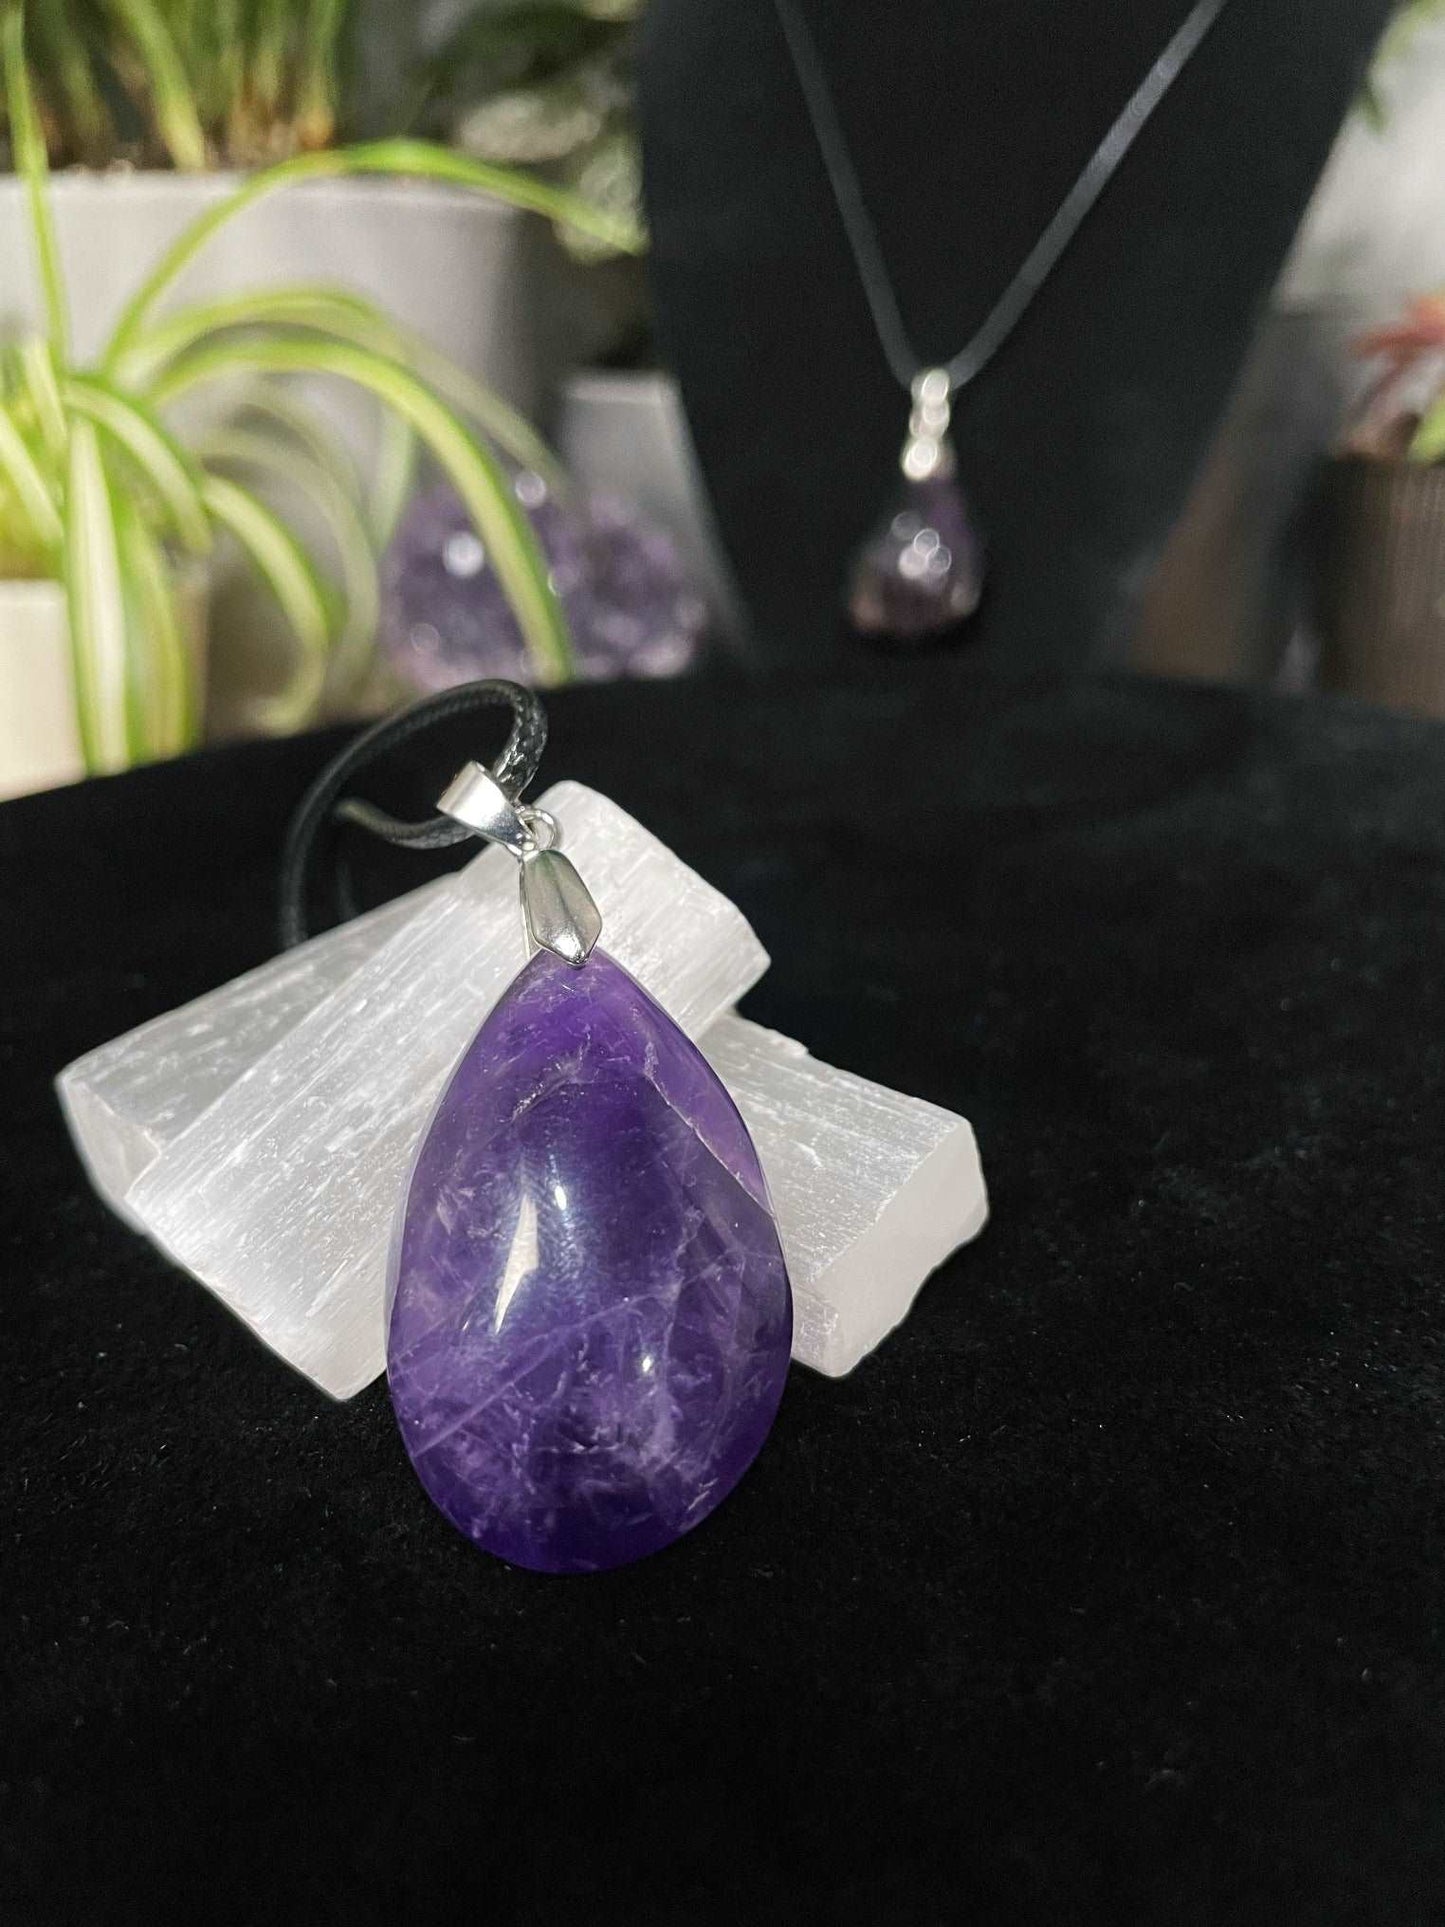 An image of a purple amethyst teardrop shaped pendant on a necklace. It sits atop some selenite chunks and a black velvet surface.